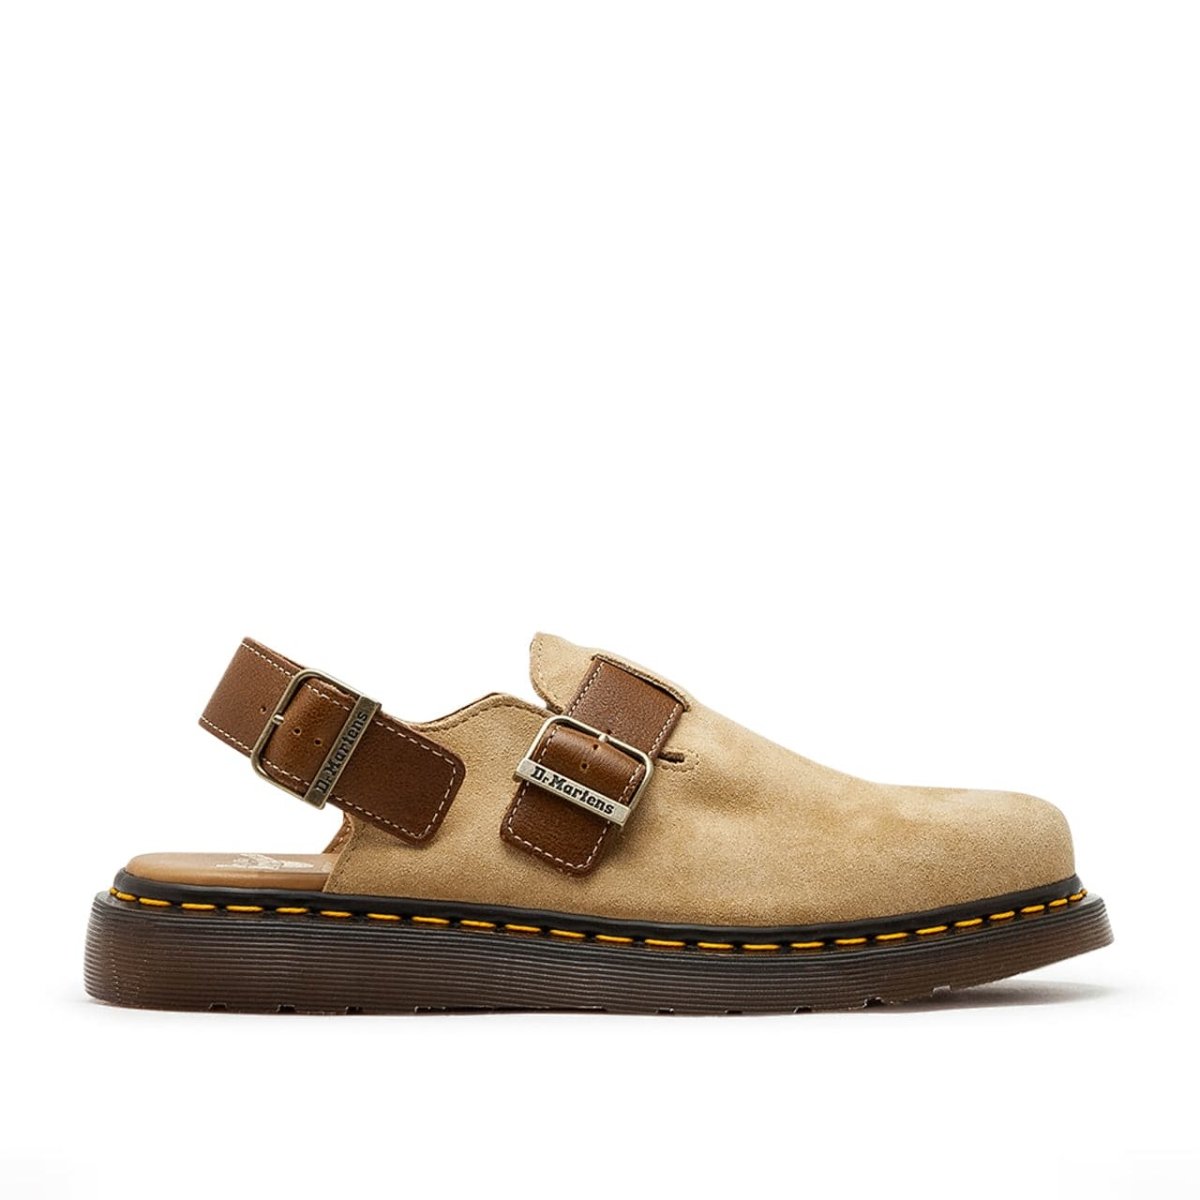 Dr. Martens Jorge Made in England Suede Mules (Braun / Gum)  - Allike Store